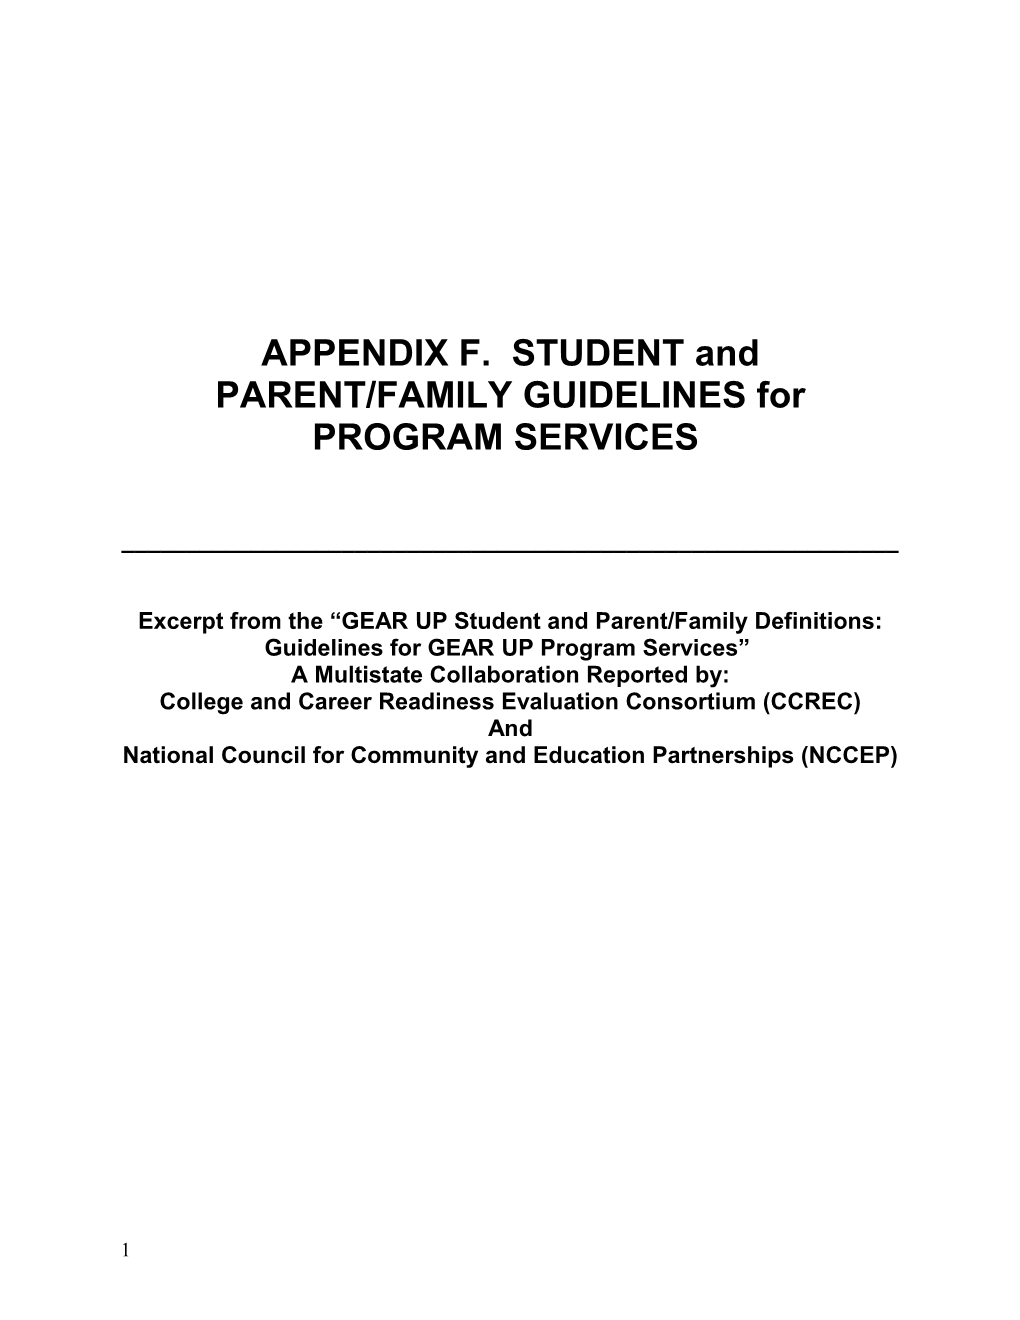 Appendix F Student and Parent Family Guidelines for Program Services FY2018